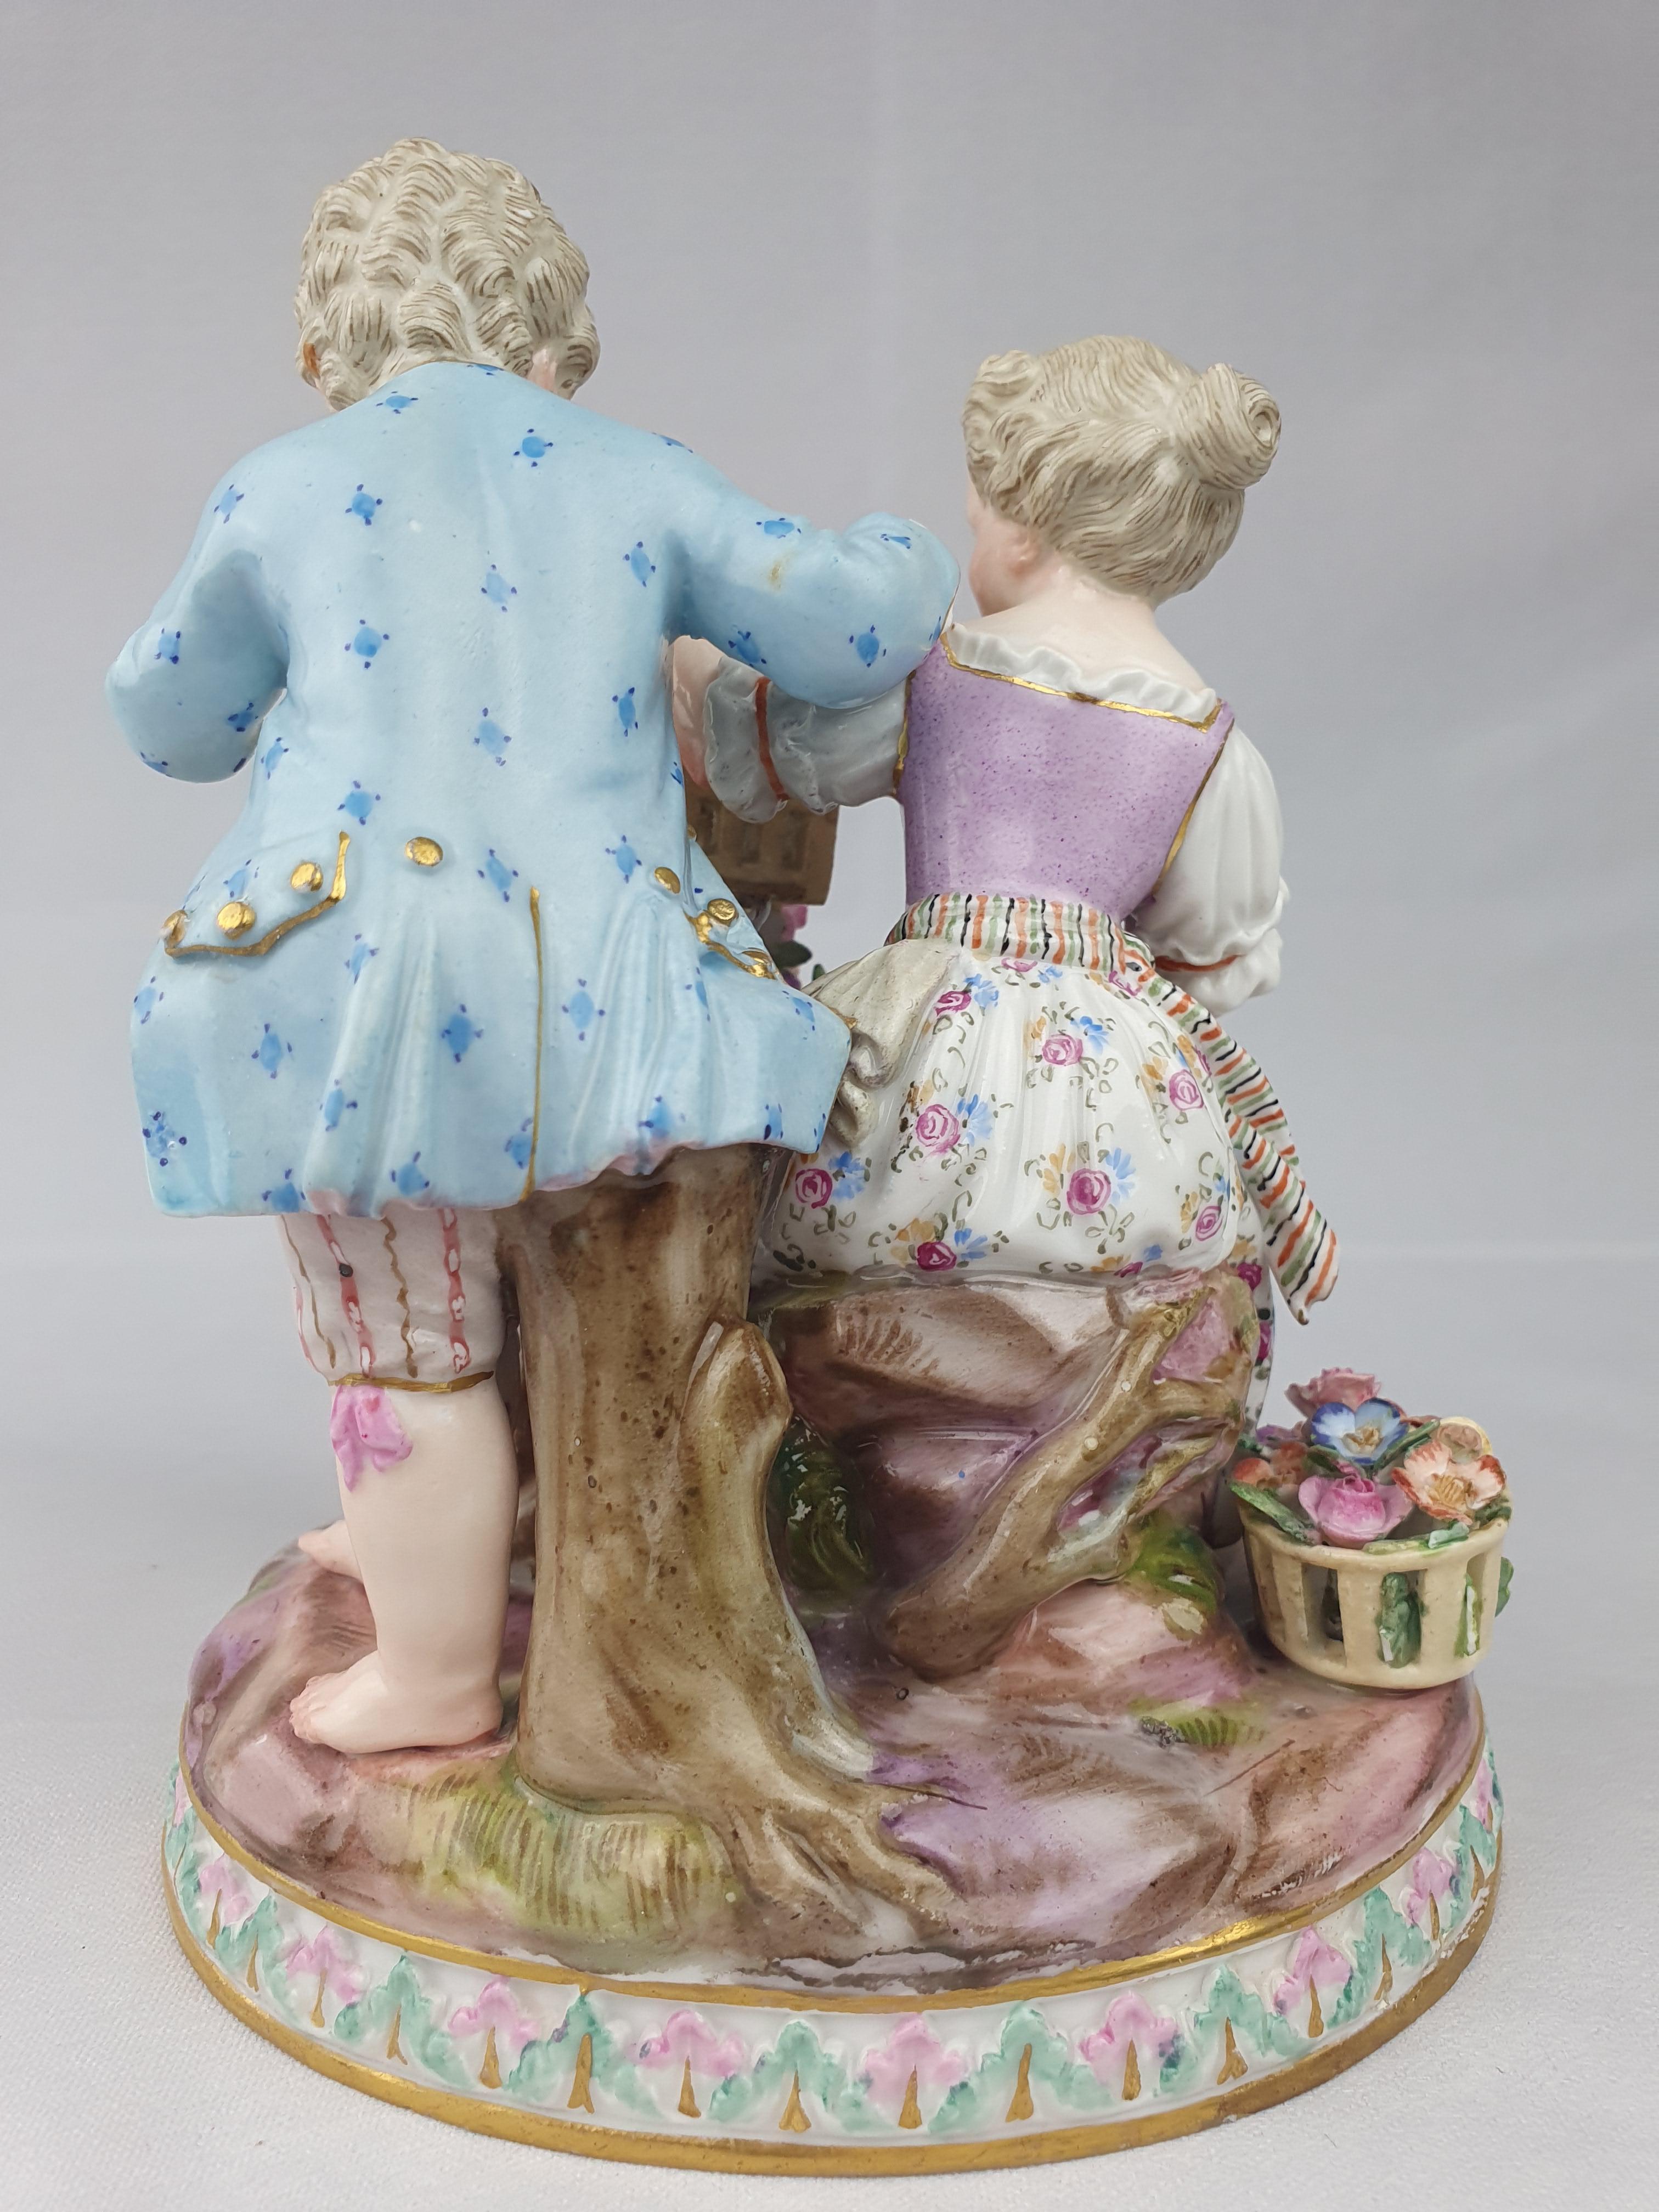 Meissen group Allegory of Spring (Der Frühling). First modelled by Johann Carl Schönheit in 1782. Two children with birdcage and garland of flowers.

Impressed G91, painters Mark 67. Blue Crossed Swords.